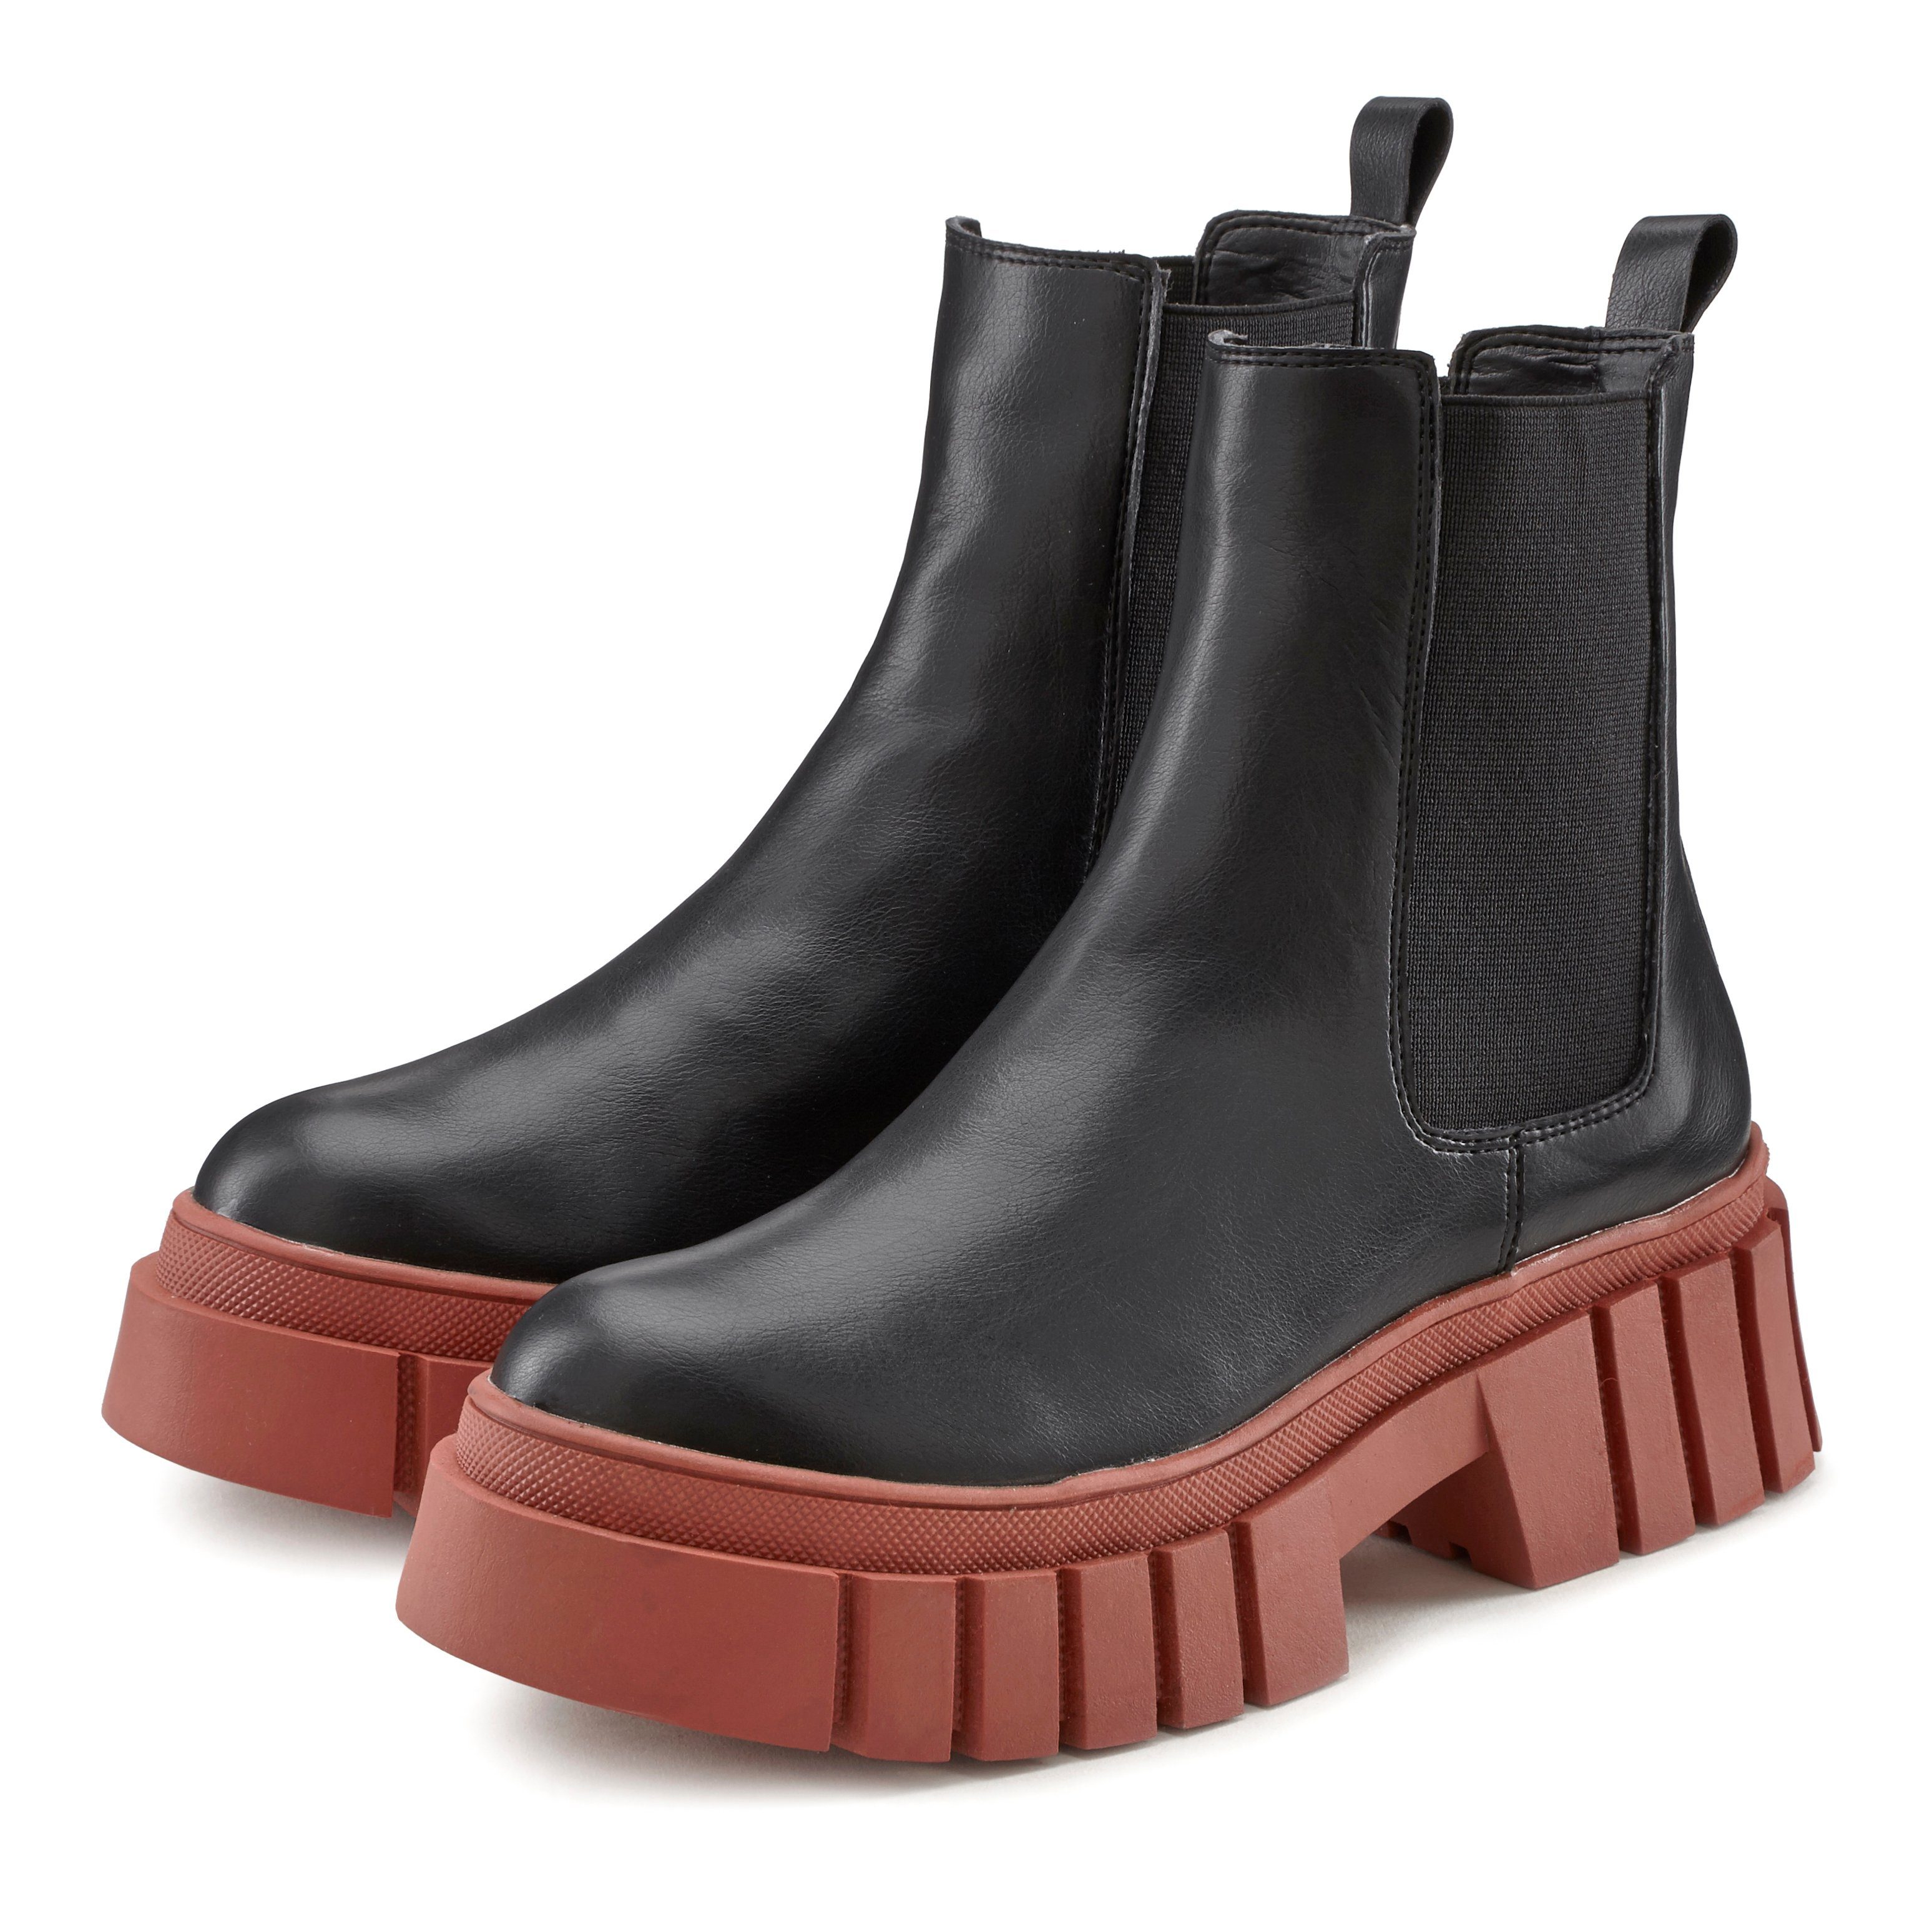 LASCANA Chelseaboots, Plateaustiefelette, Ankle Boots, Chunky Sohle im  trendigen Farbmix